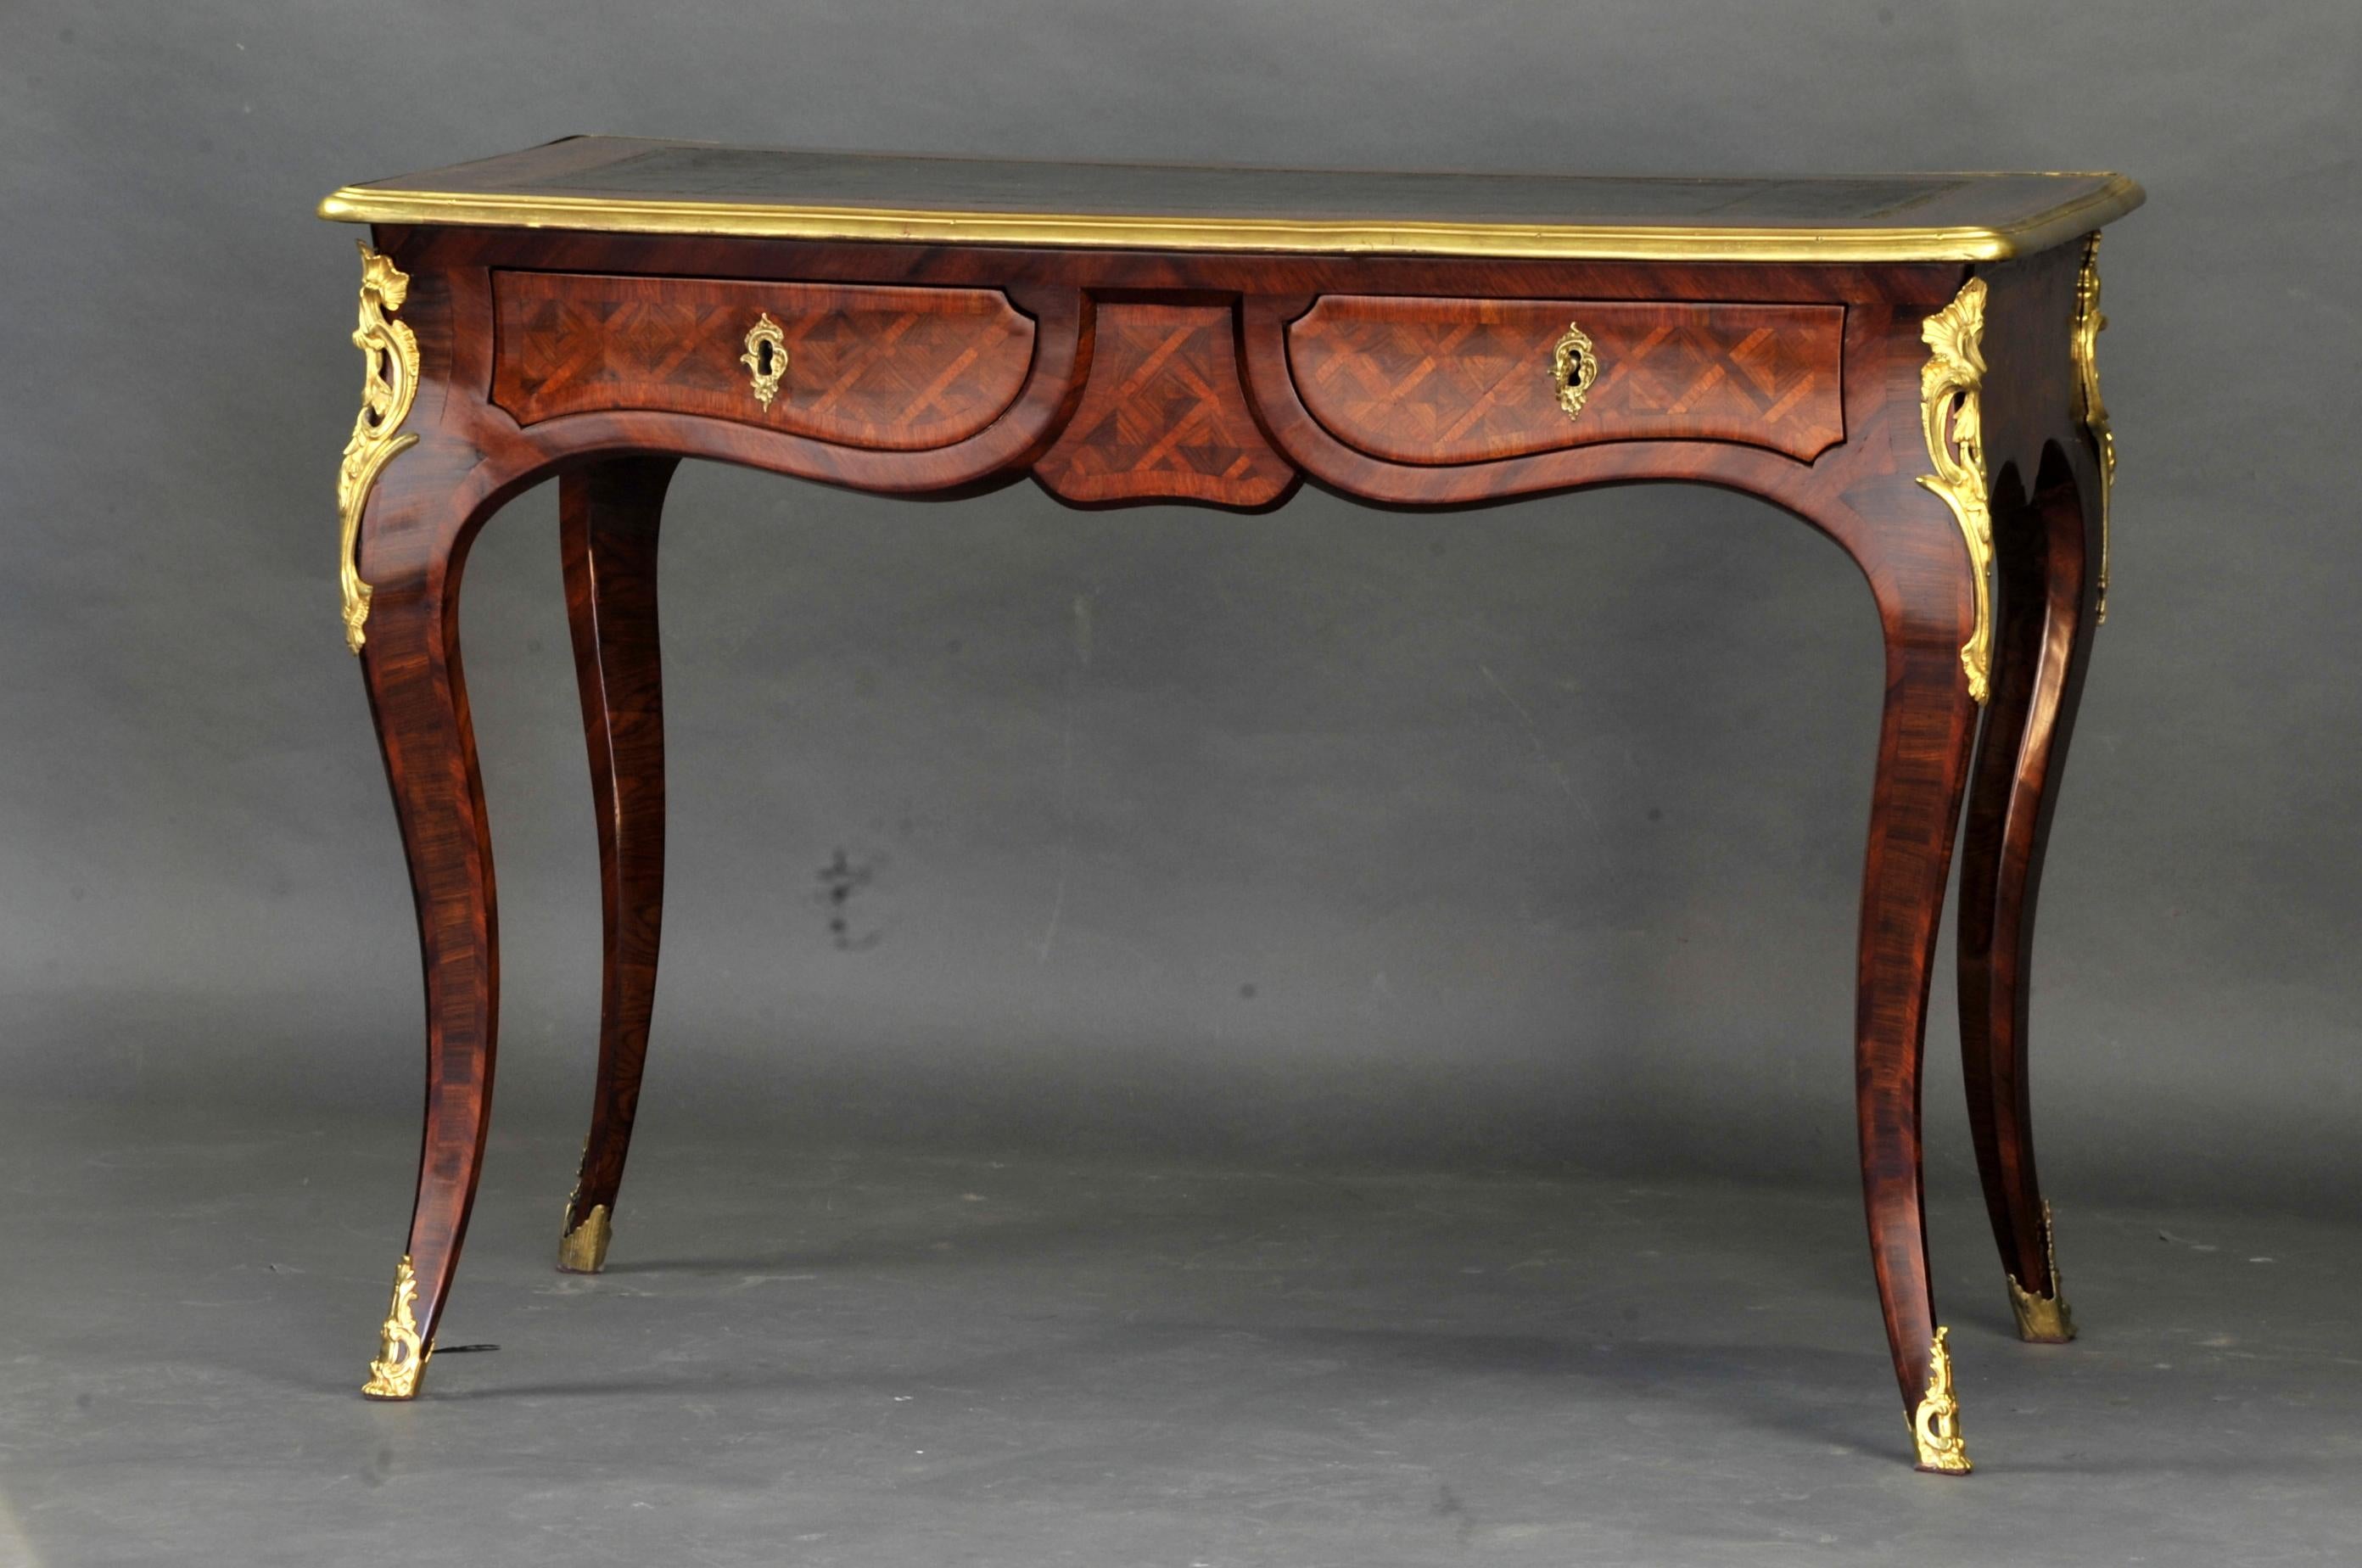 Kingwood Lady Louis XV Desk in Violet Wood Marquetry